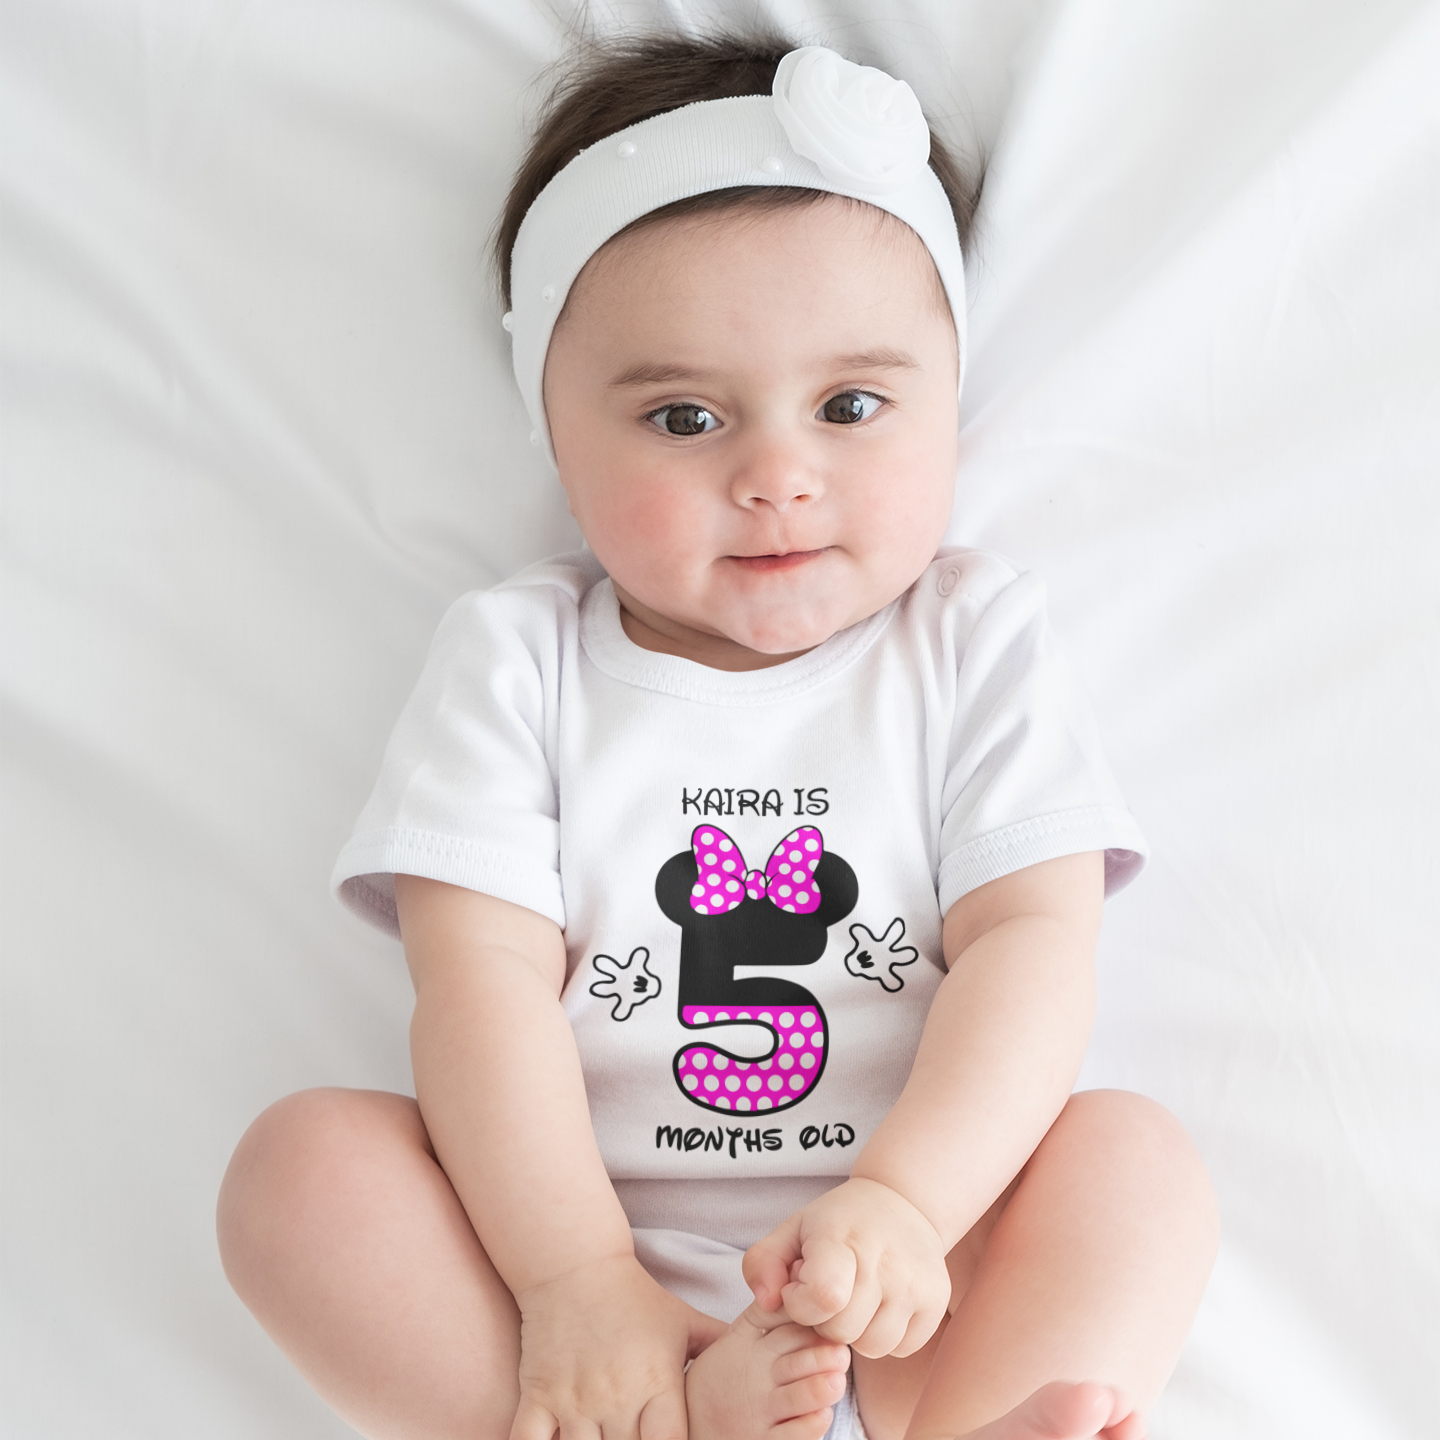 Monthly Birthday - Minnie Mouse Number - White Onesie